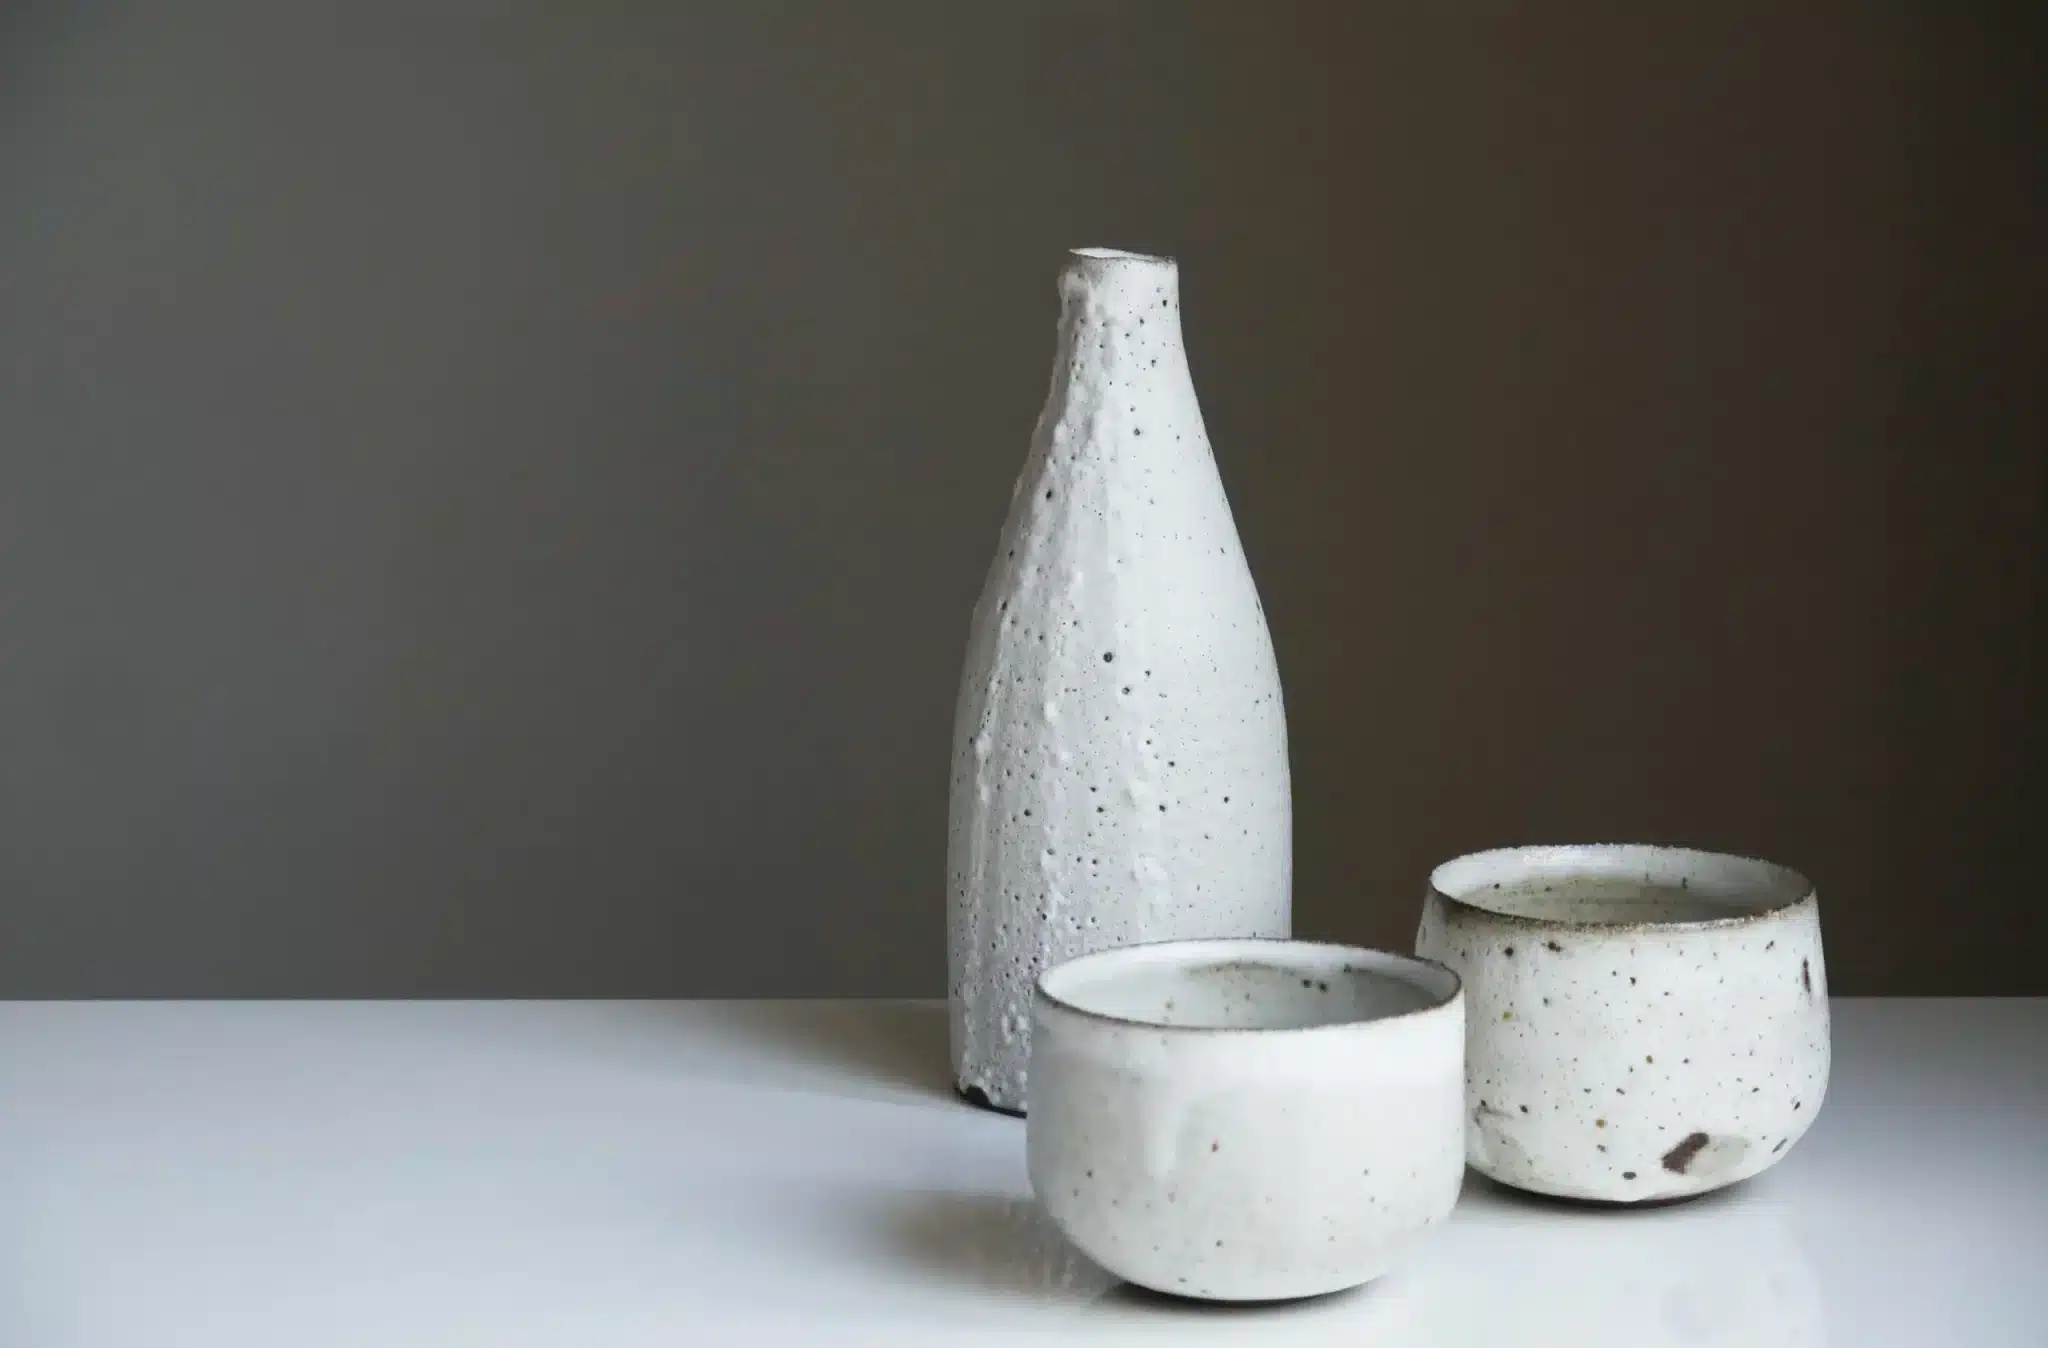 A minimalist display of ceramic art consisting of a tall, textured white vase alongside two matching bowls on a white surface. The items, featuring a speckled pattern reminiscent of natural stone, are set against a gray background that accentuates their simple yet elegant forms.